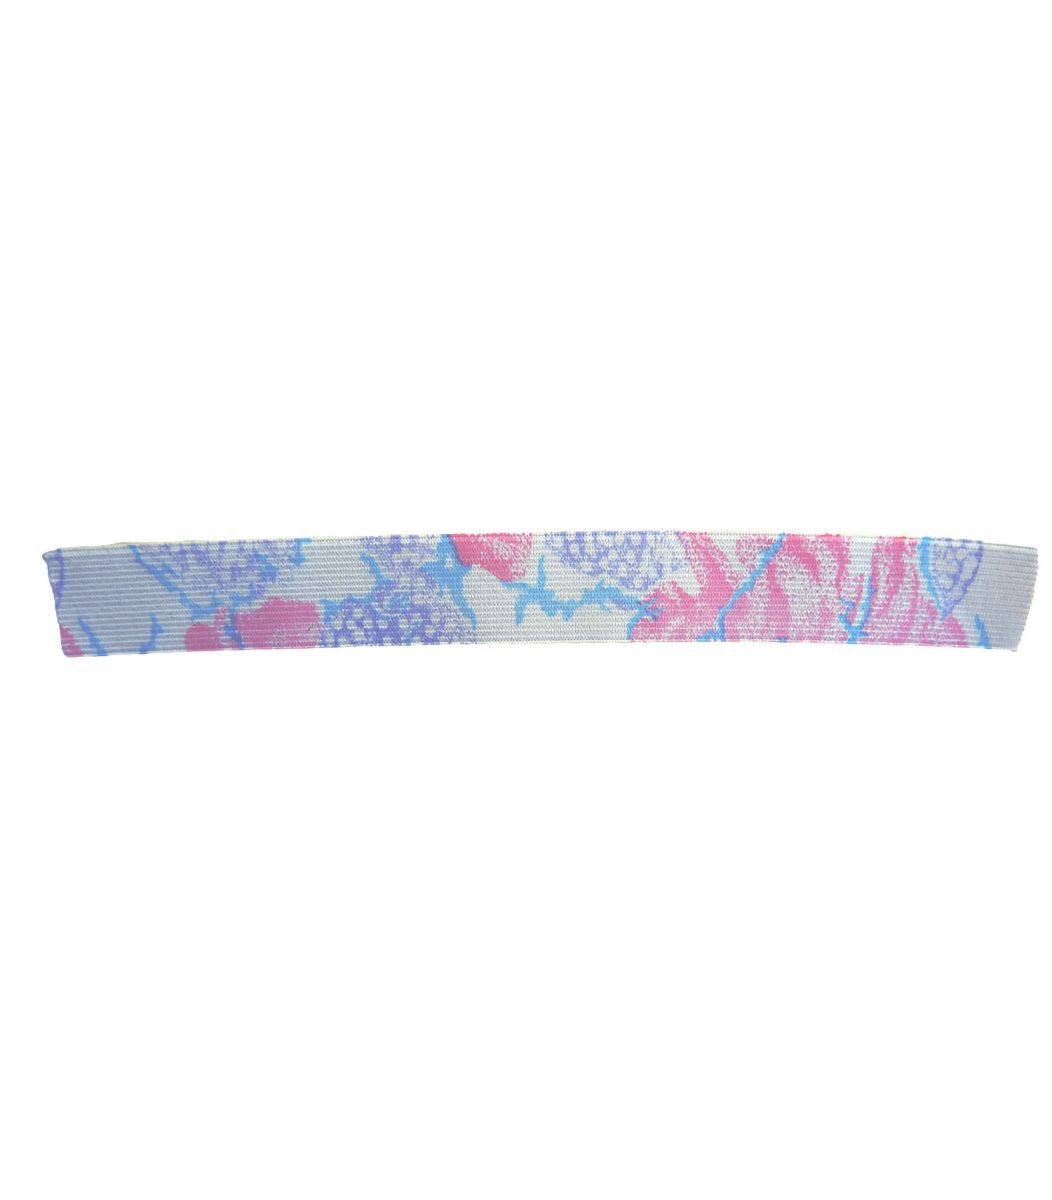  Rubber Band  Rubber Band Colorful 20mm Rub20-b-2